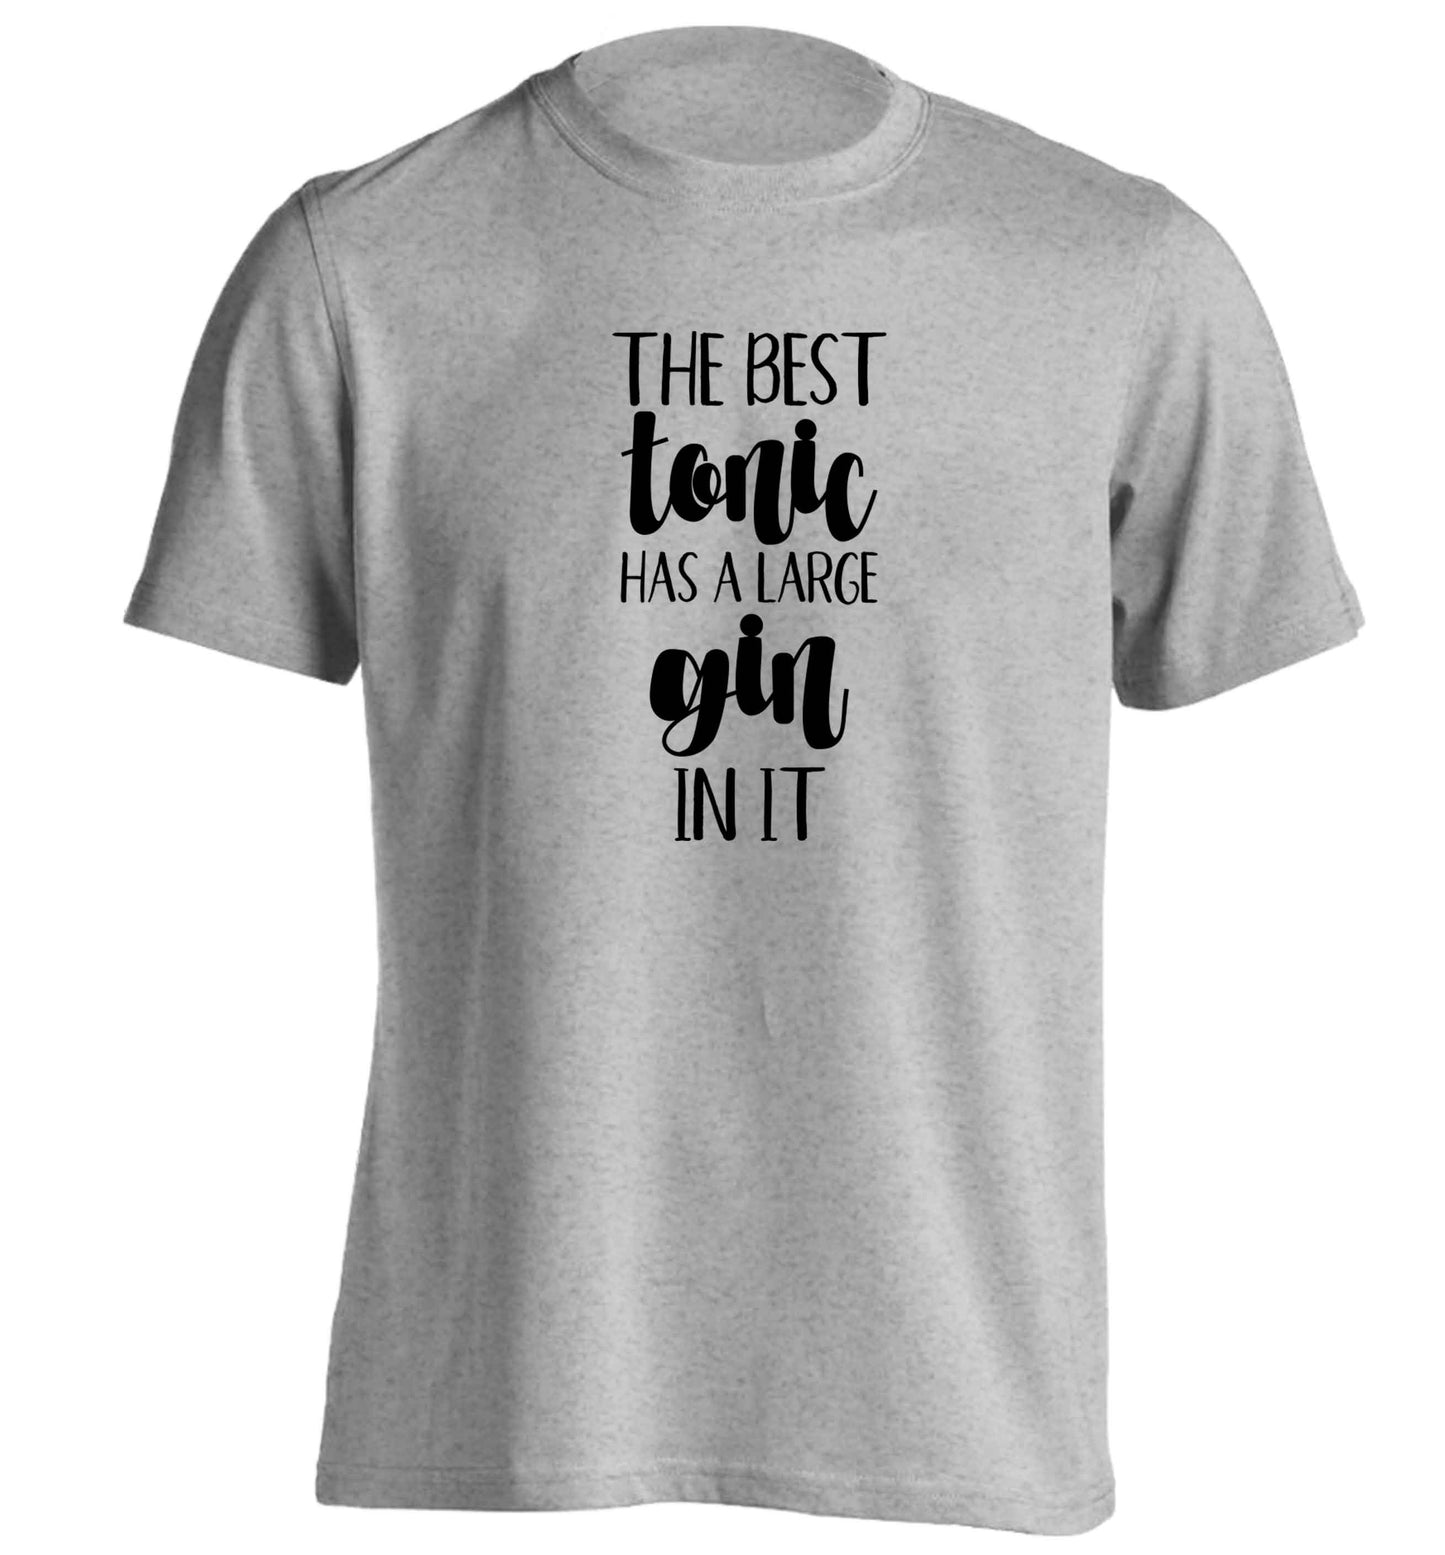 The best tonic has a large gin in it adults unisex grey Tshirt 2XL